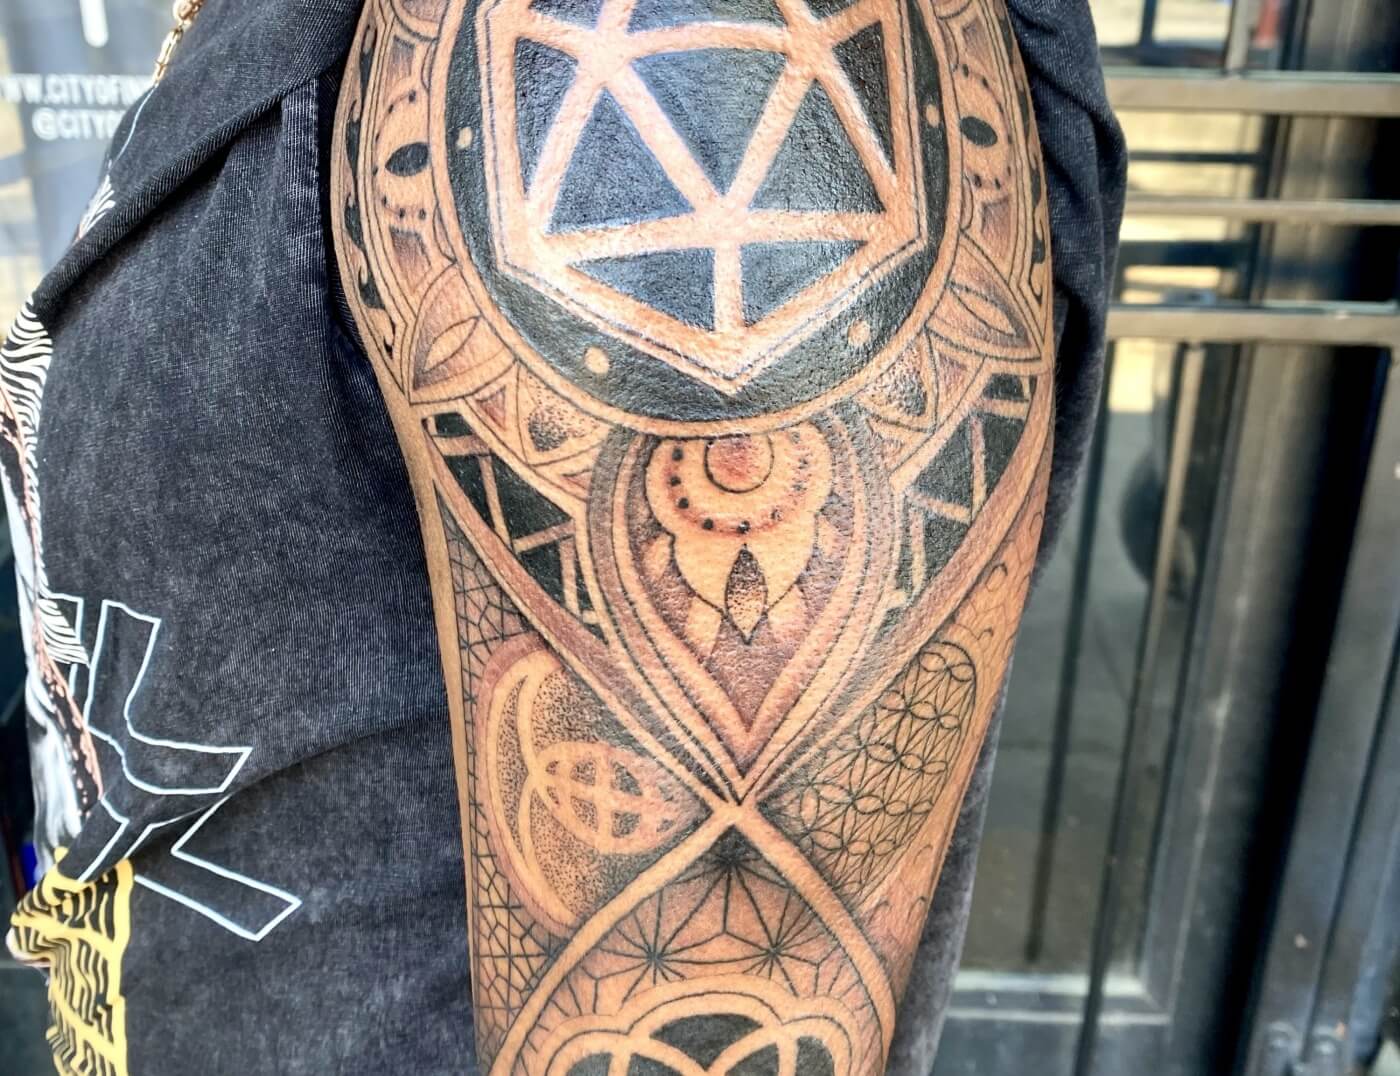 Geometric Mandala tattoo by Lyric The Artist at Iron Palm Tattoos in south downtown Atlanta. Mandala tattoos have their origins in Hindu and Buddhist cultures, where mandalas are used as spiritual and ritual symbols. The word "mandala" comes from Sanskrit and means "circle" or "center." What do you think? Let us know in the comments. Iron Palm is open late night until 2AM. Call 404-973-7828 or stop by for a free consultation.